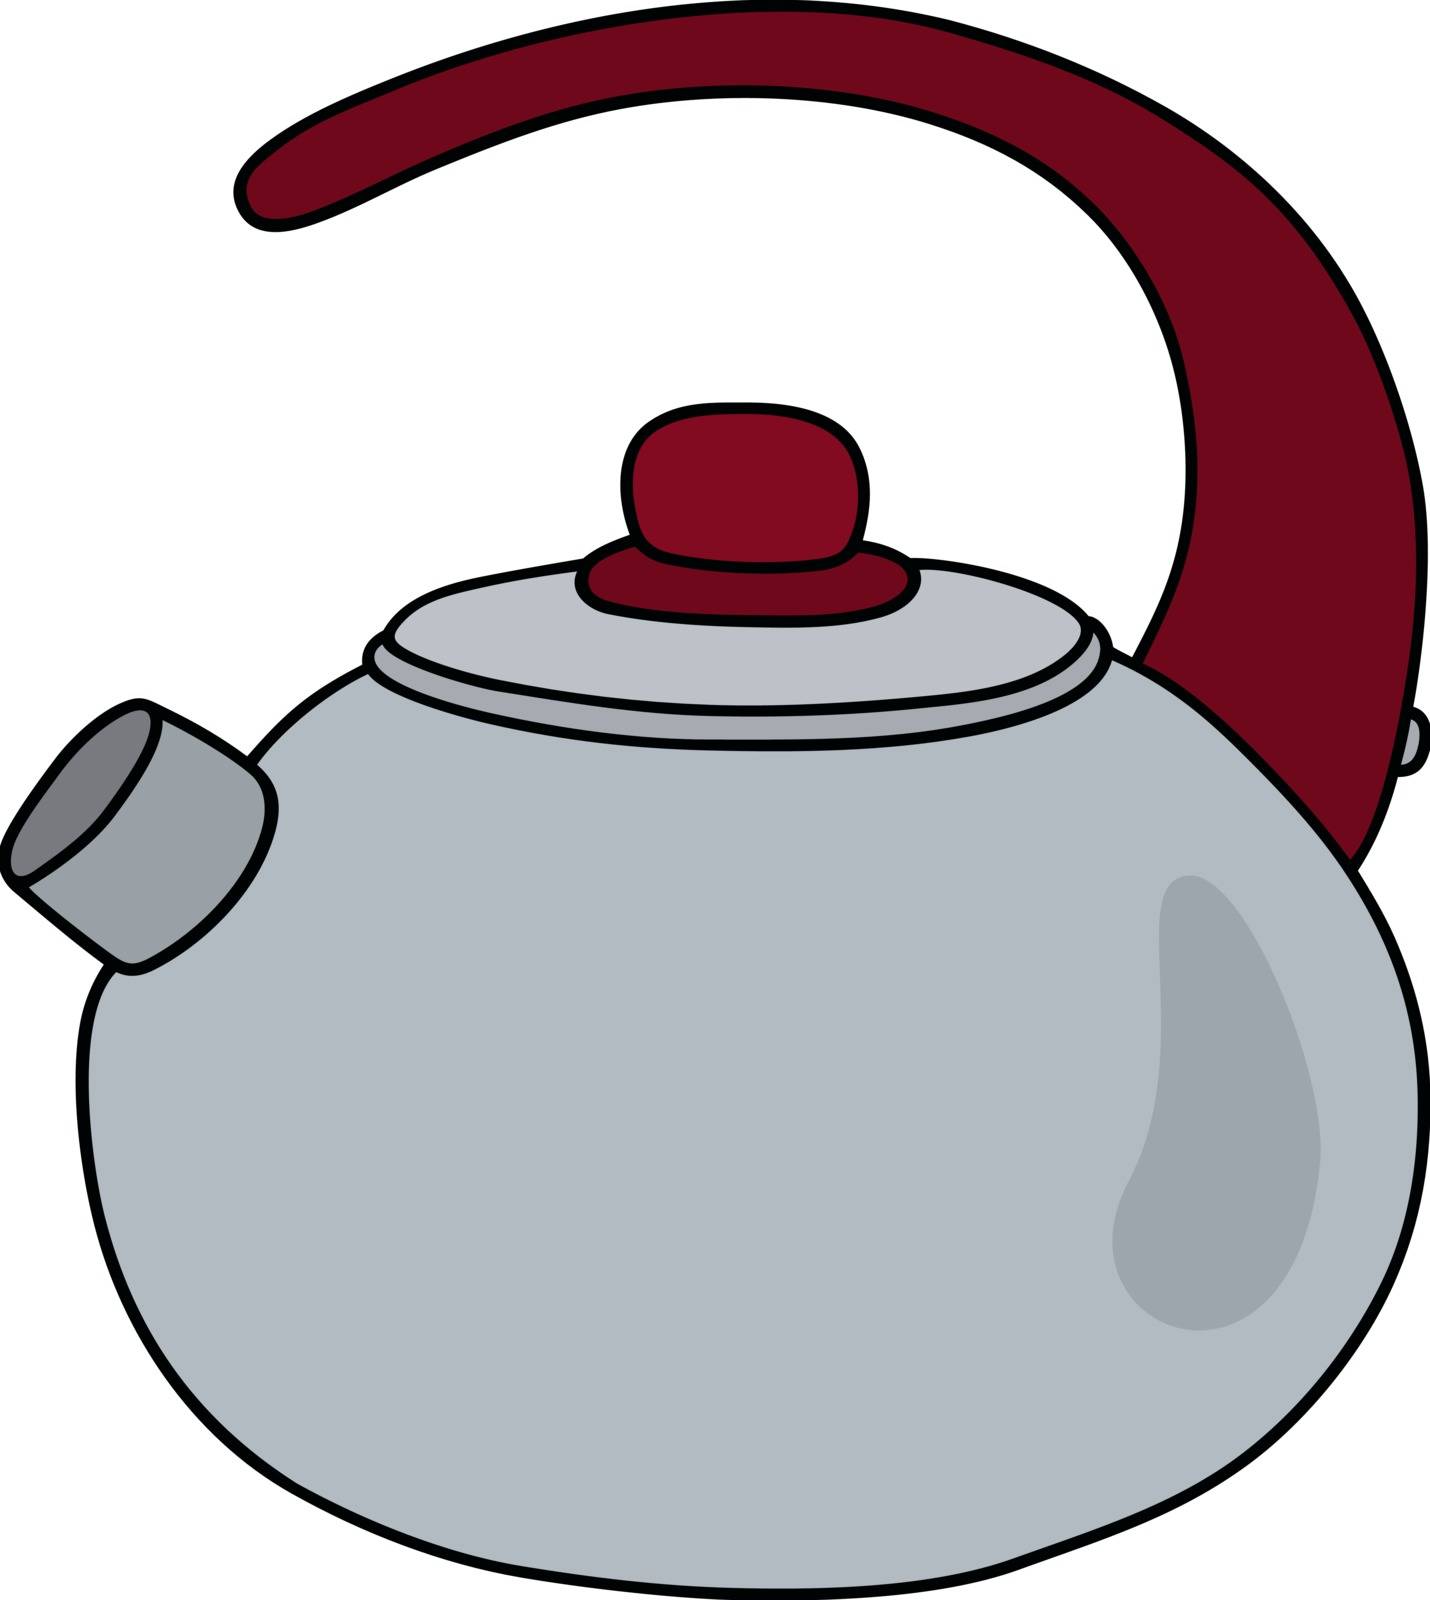 Hand drawing of a steel kettle with a red plastic handle